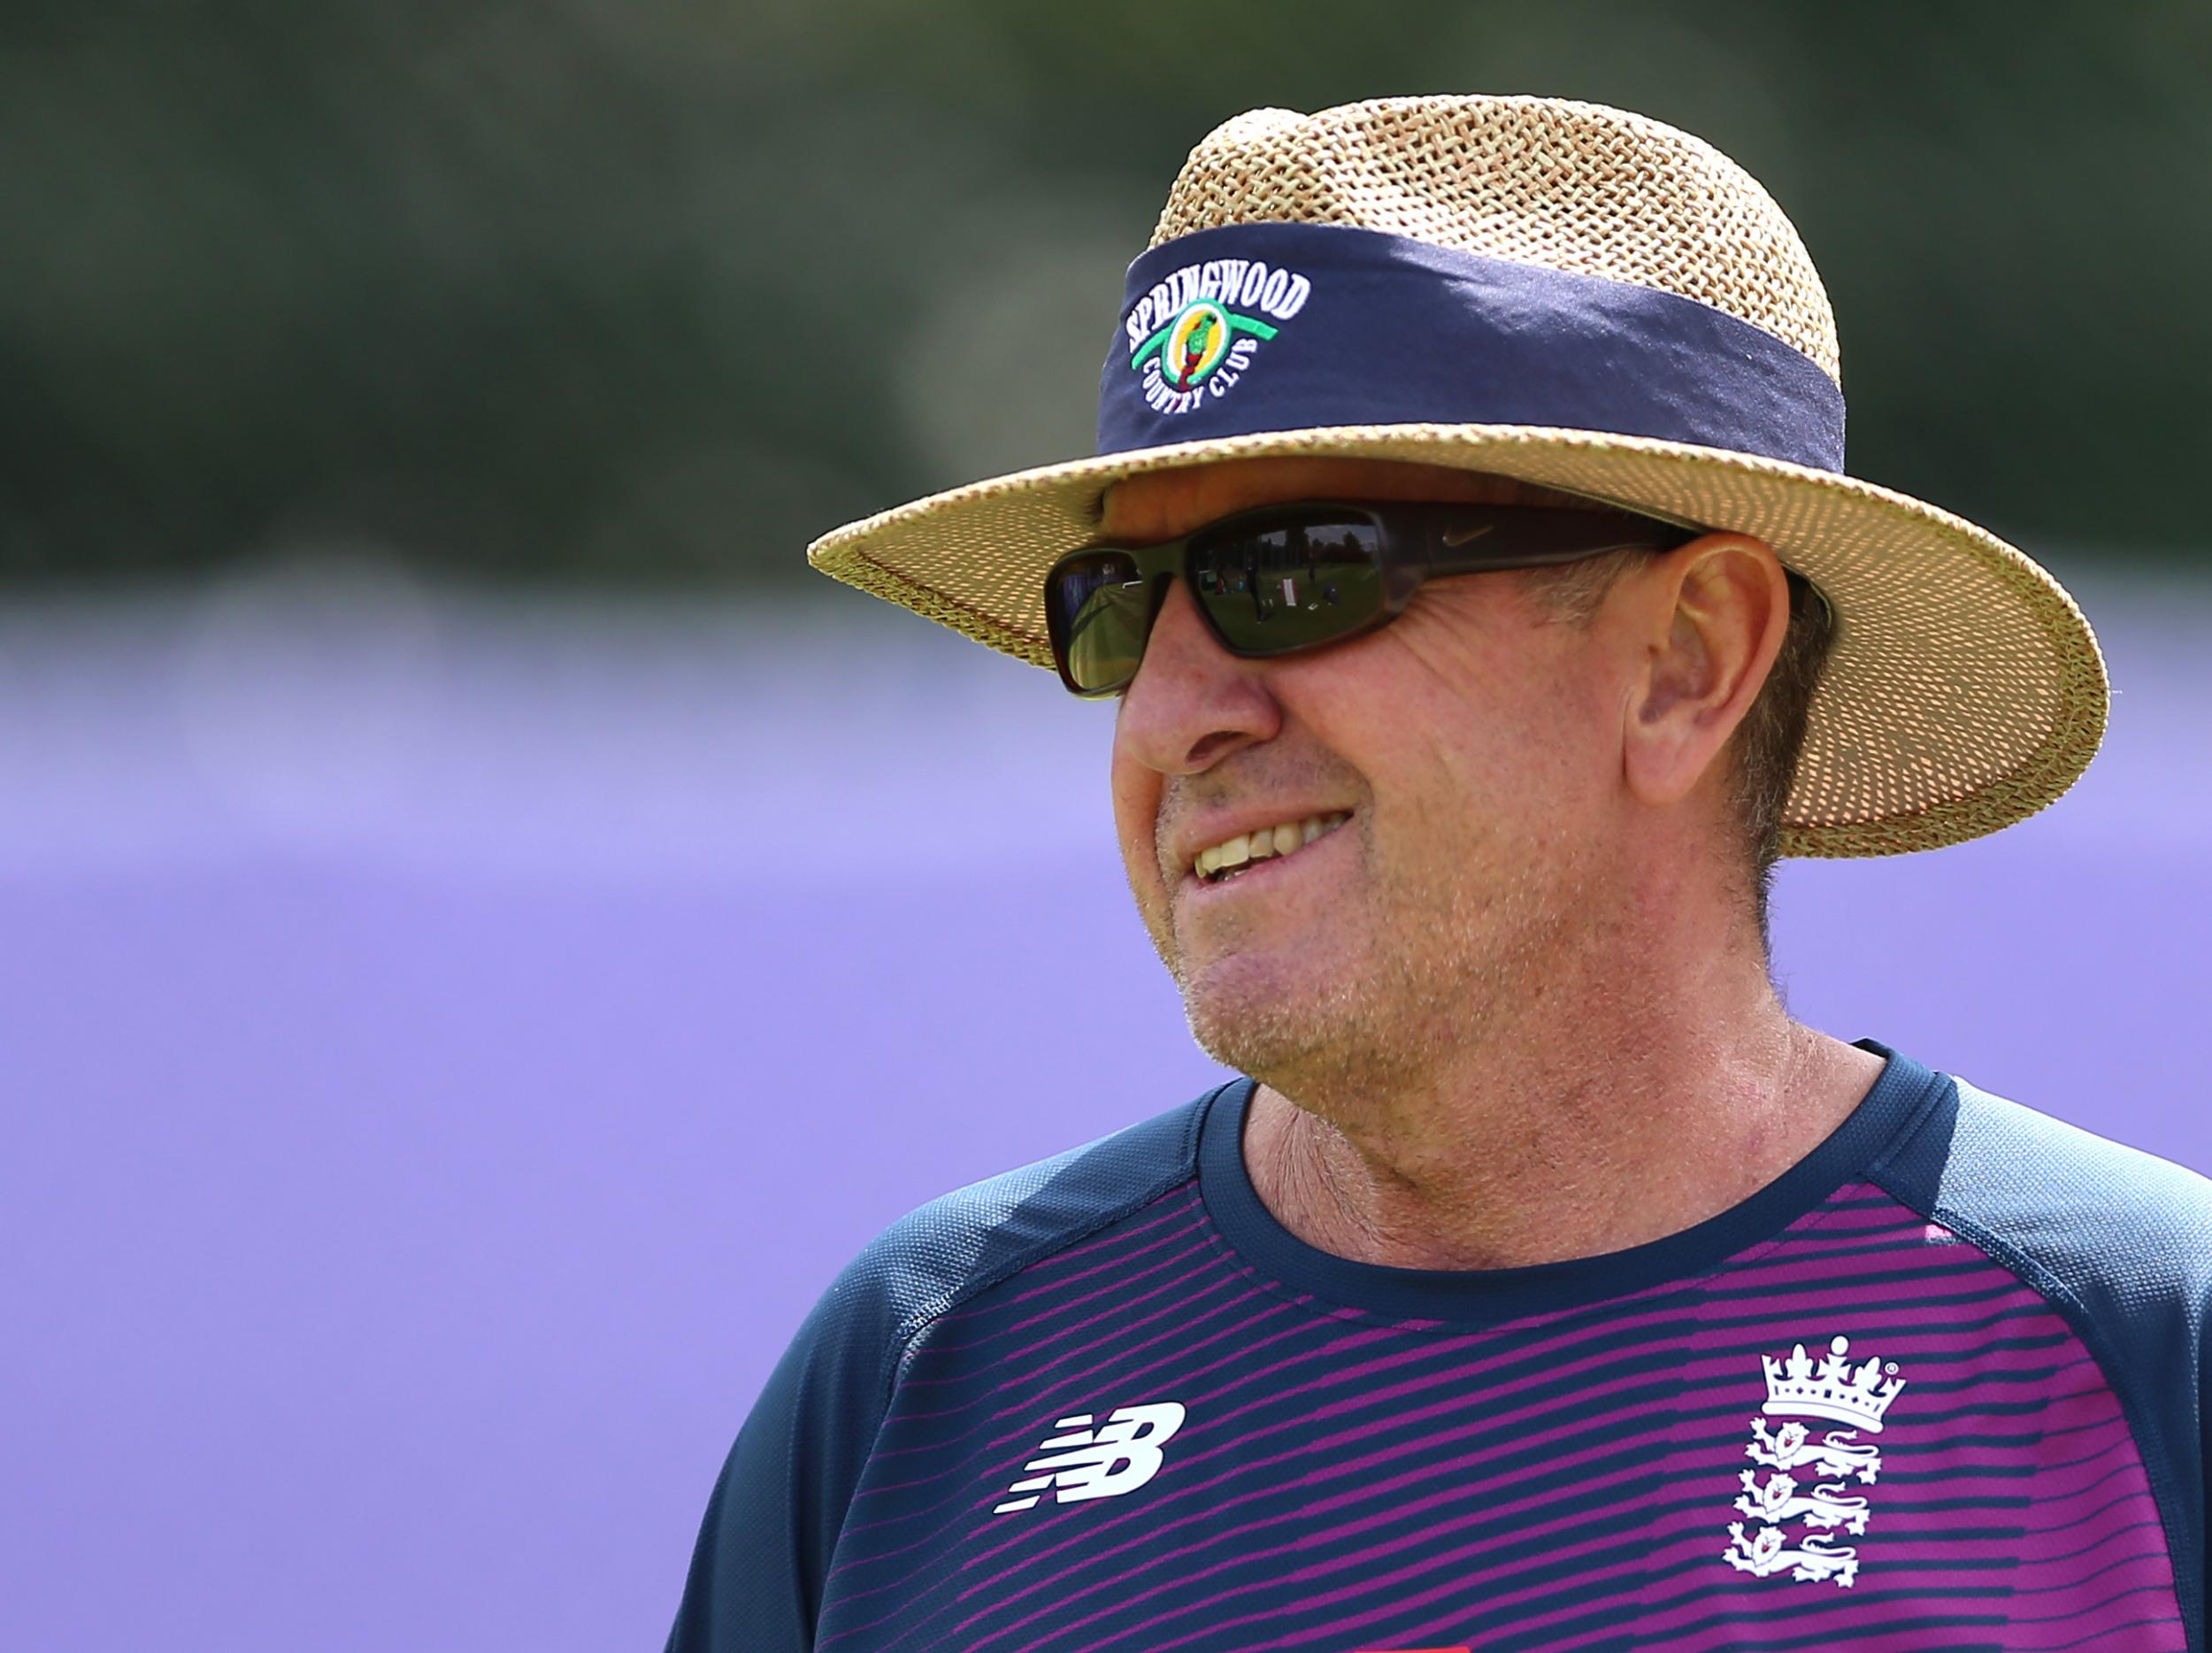 Trevor Bayliss knows his side must keep cool